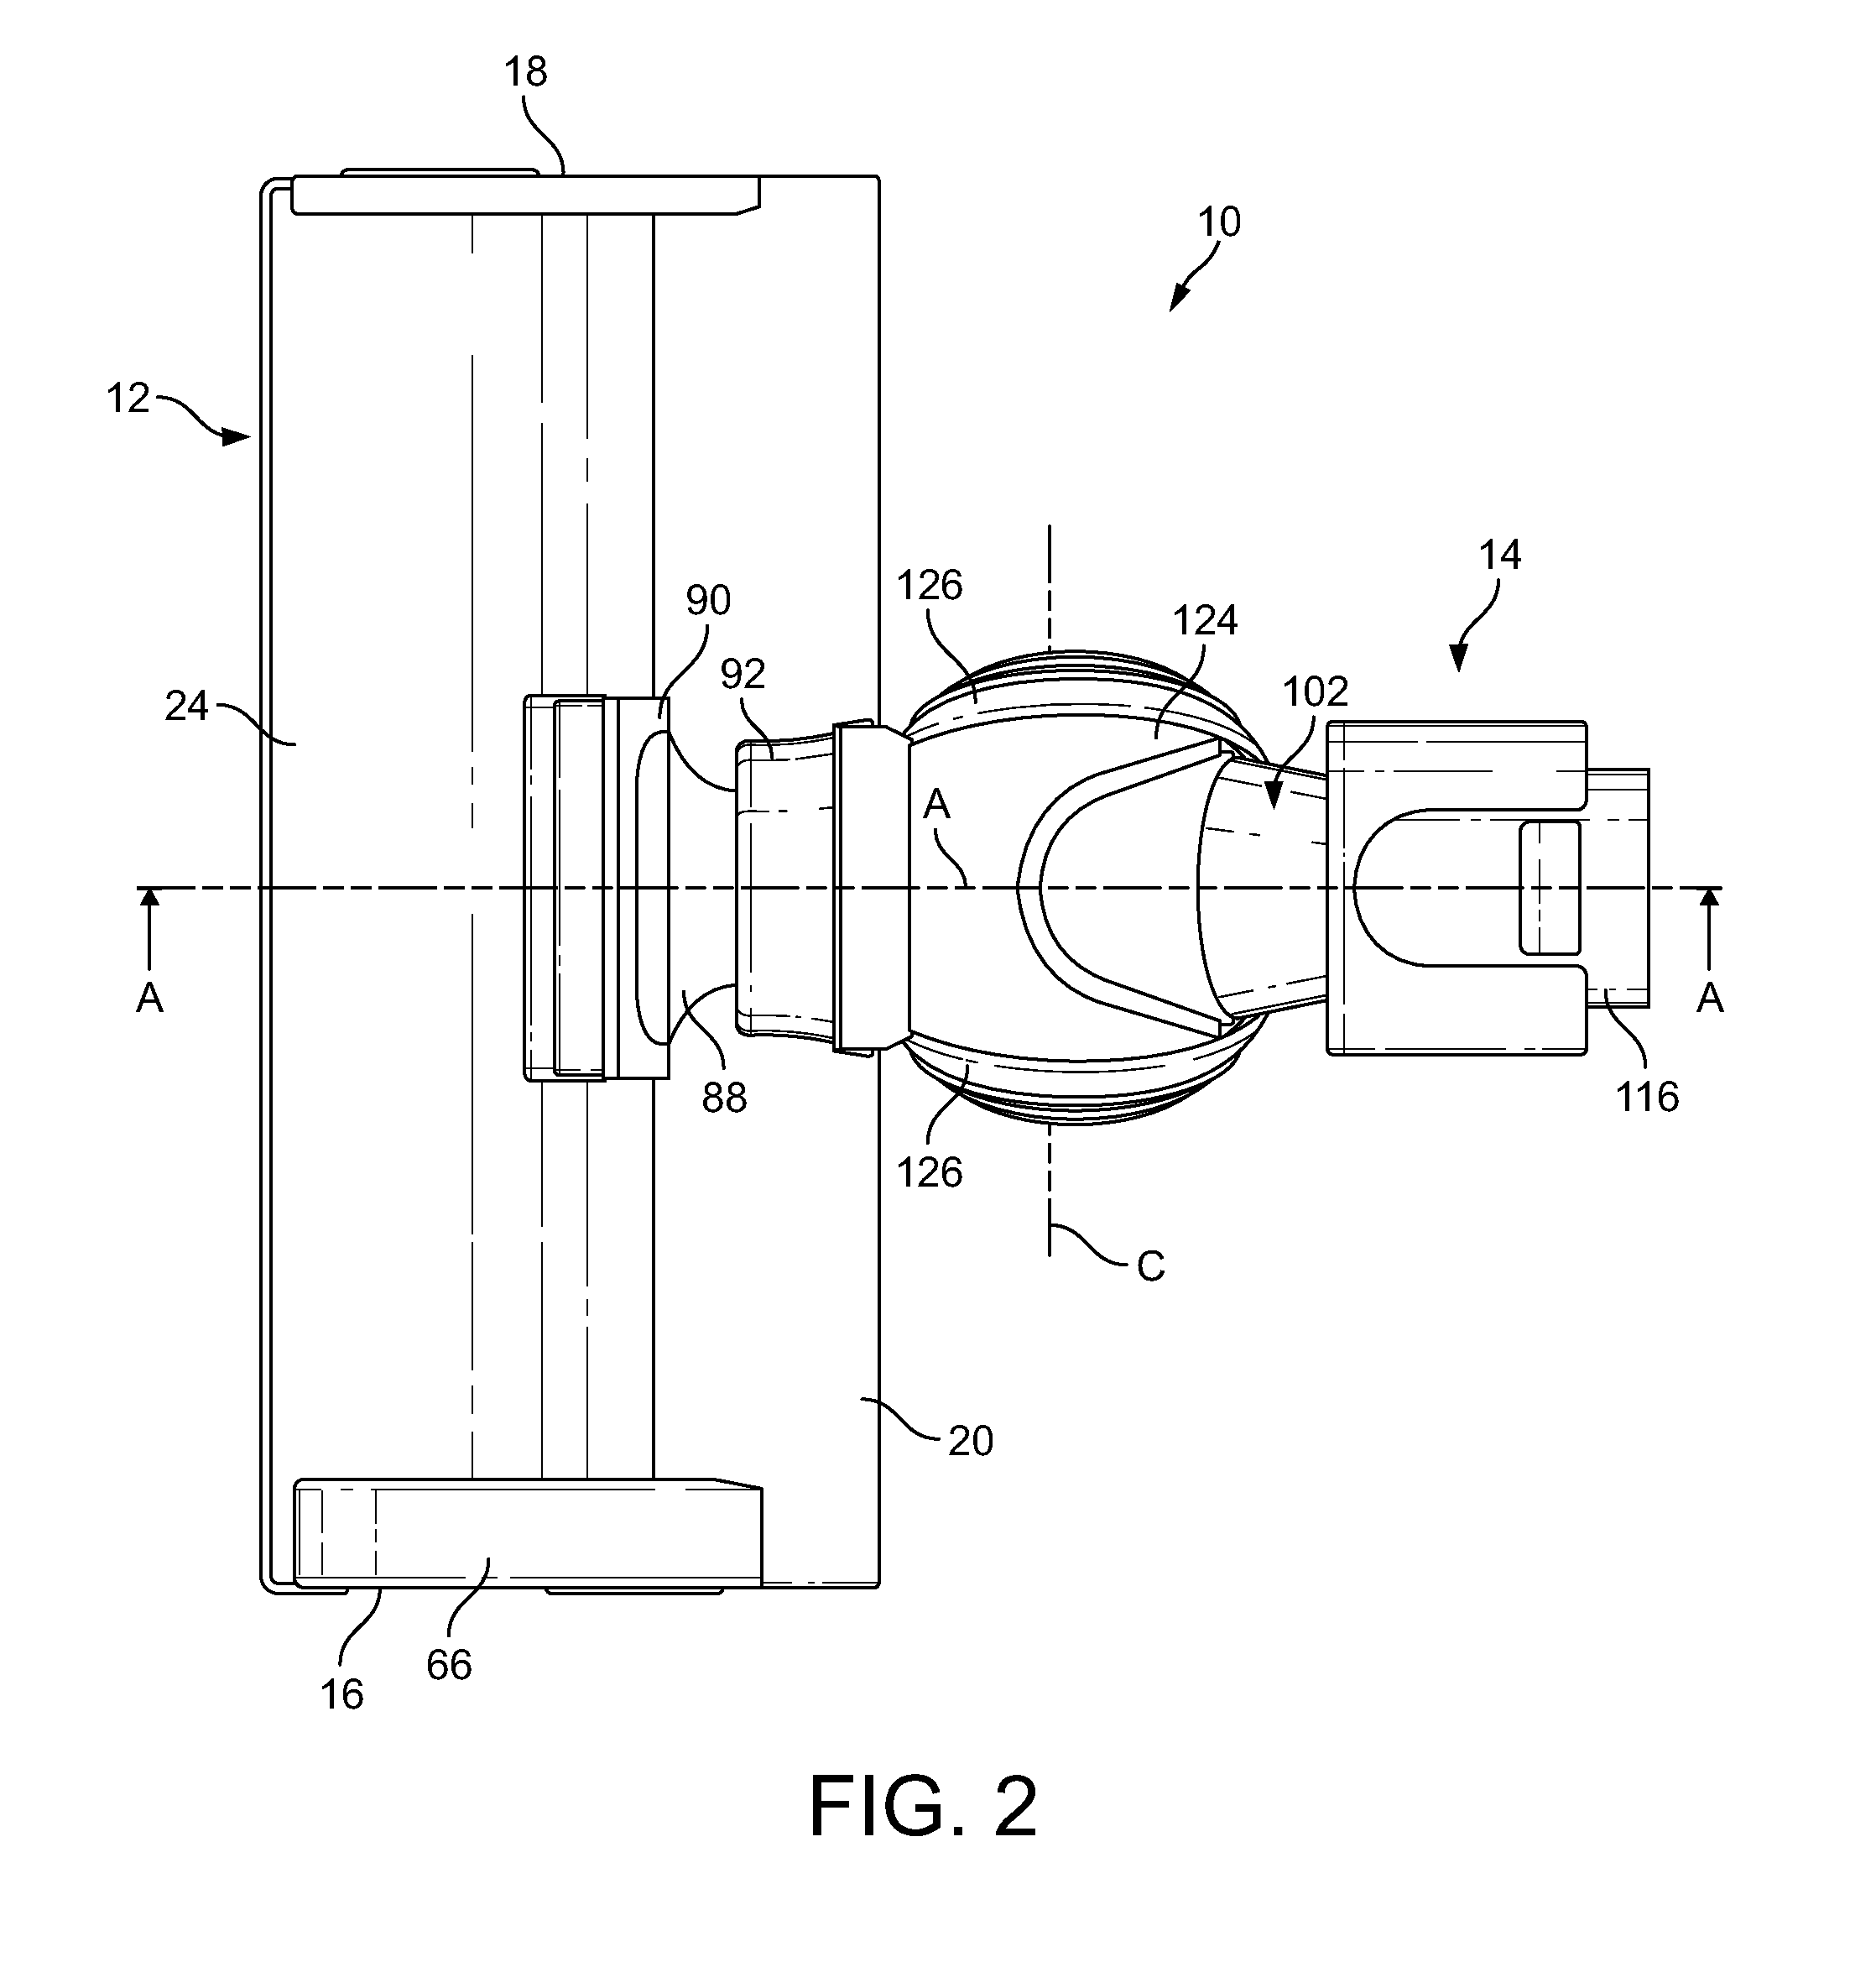 Cleaner head for a surface treating appliance